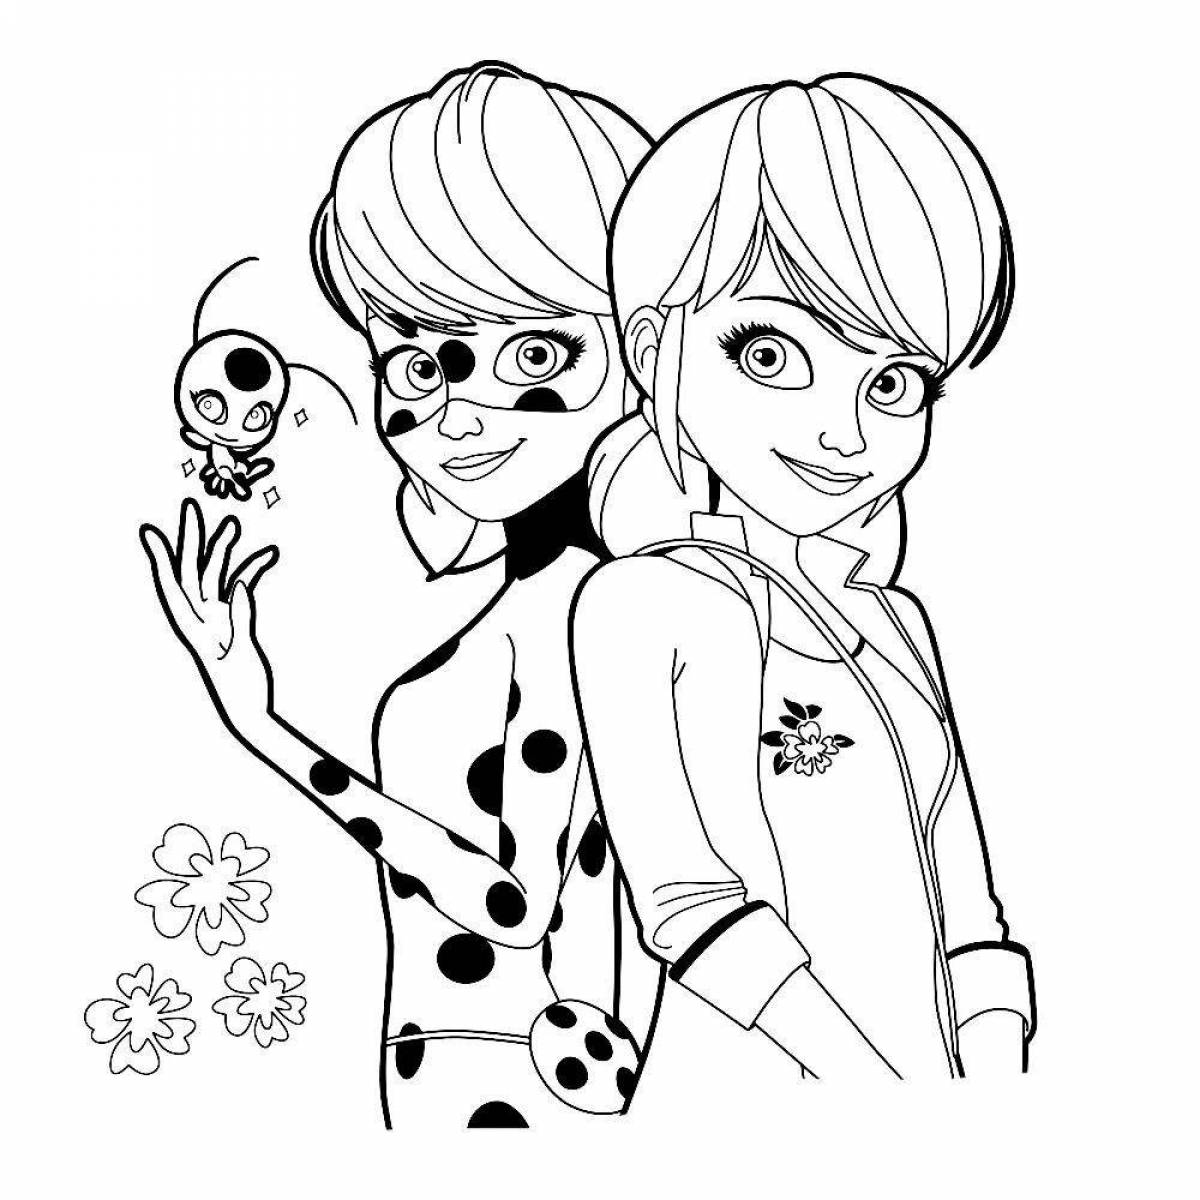 Glorious marinette coloring book for kids